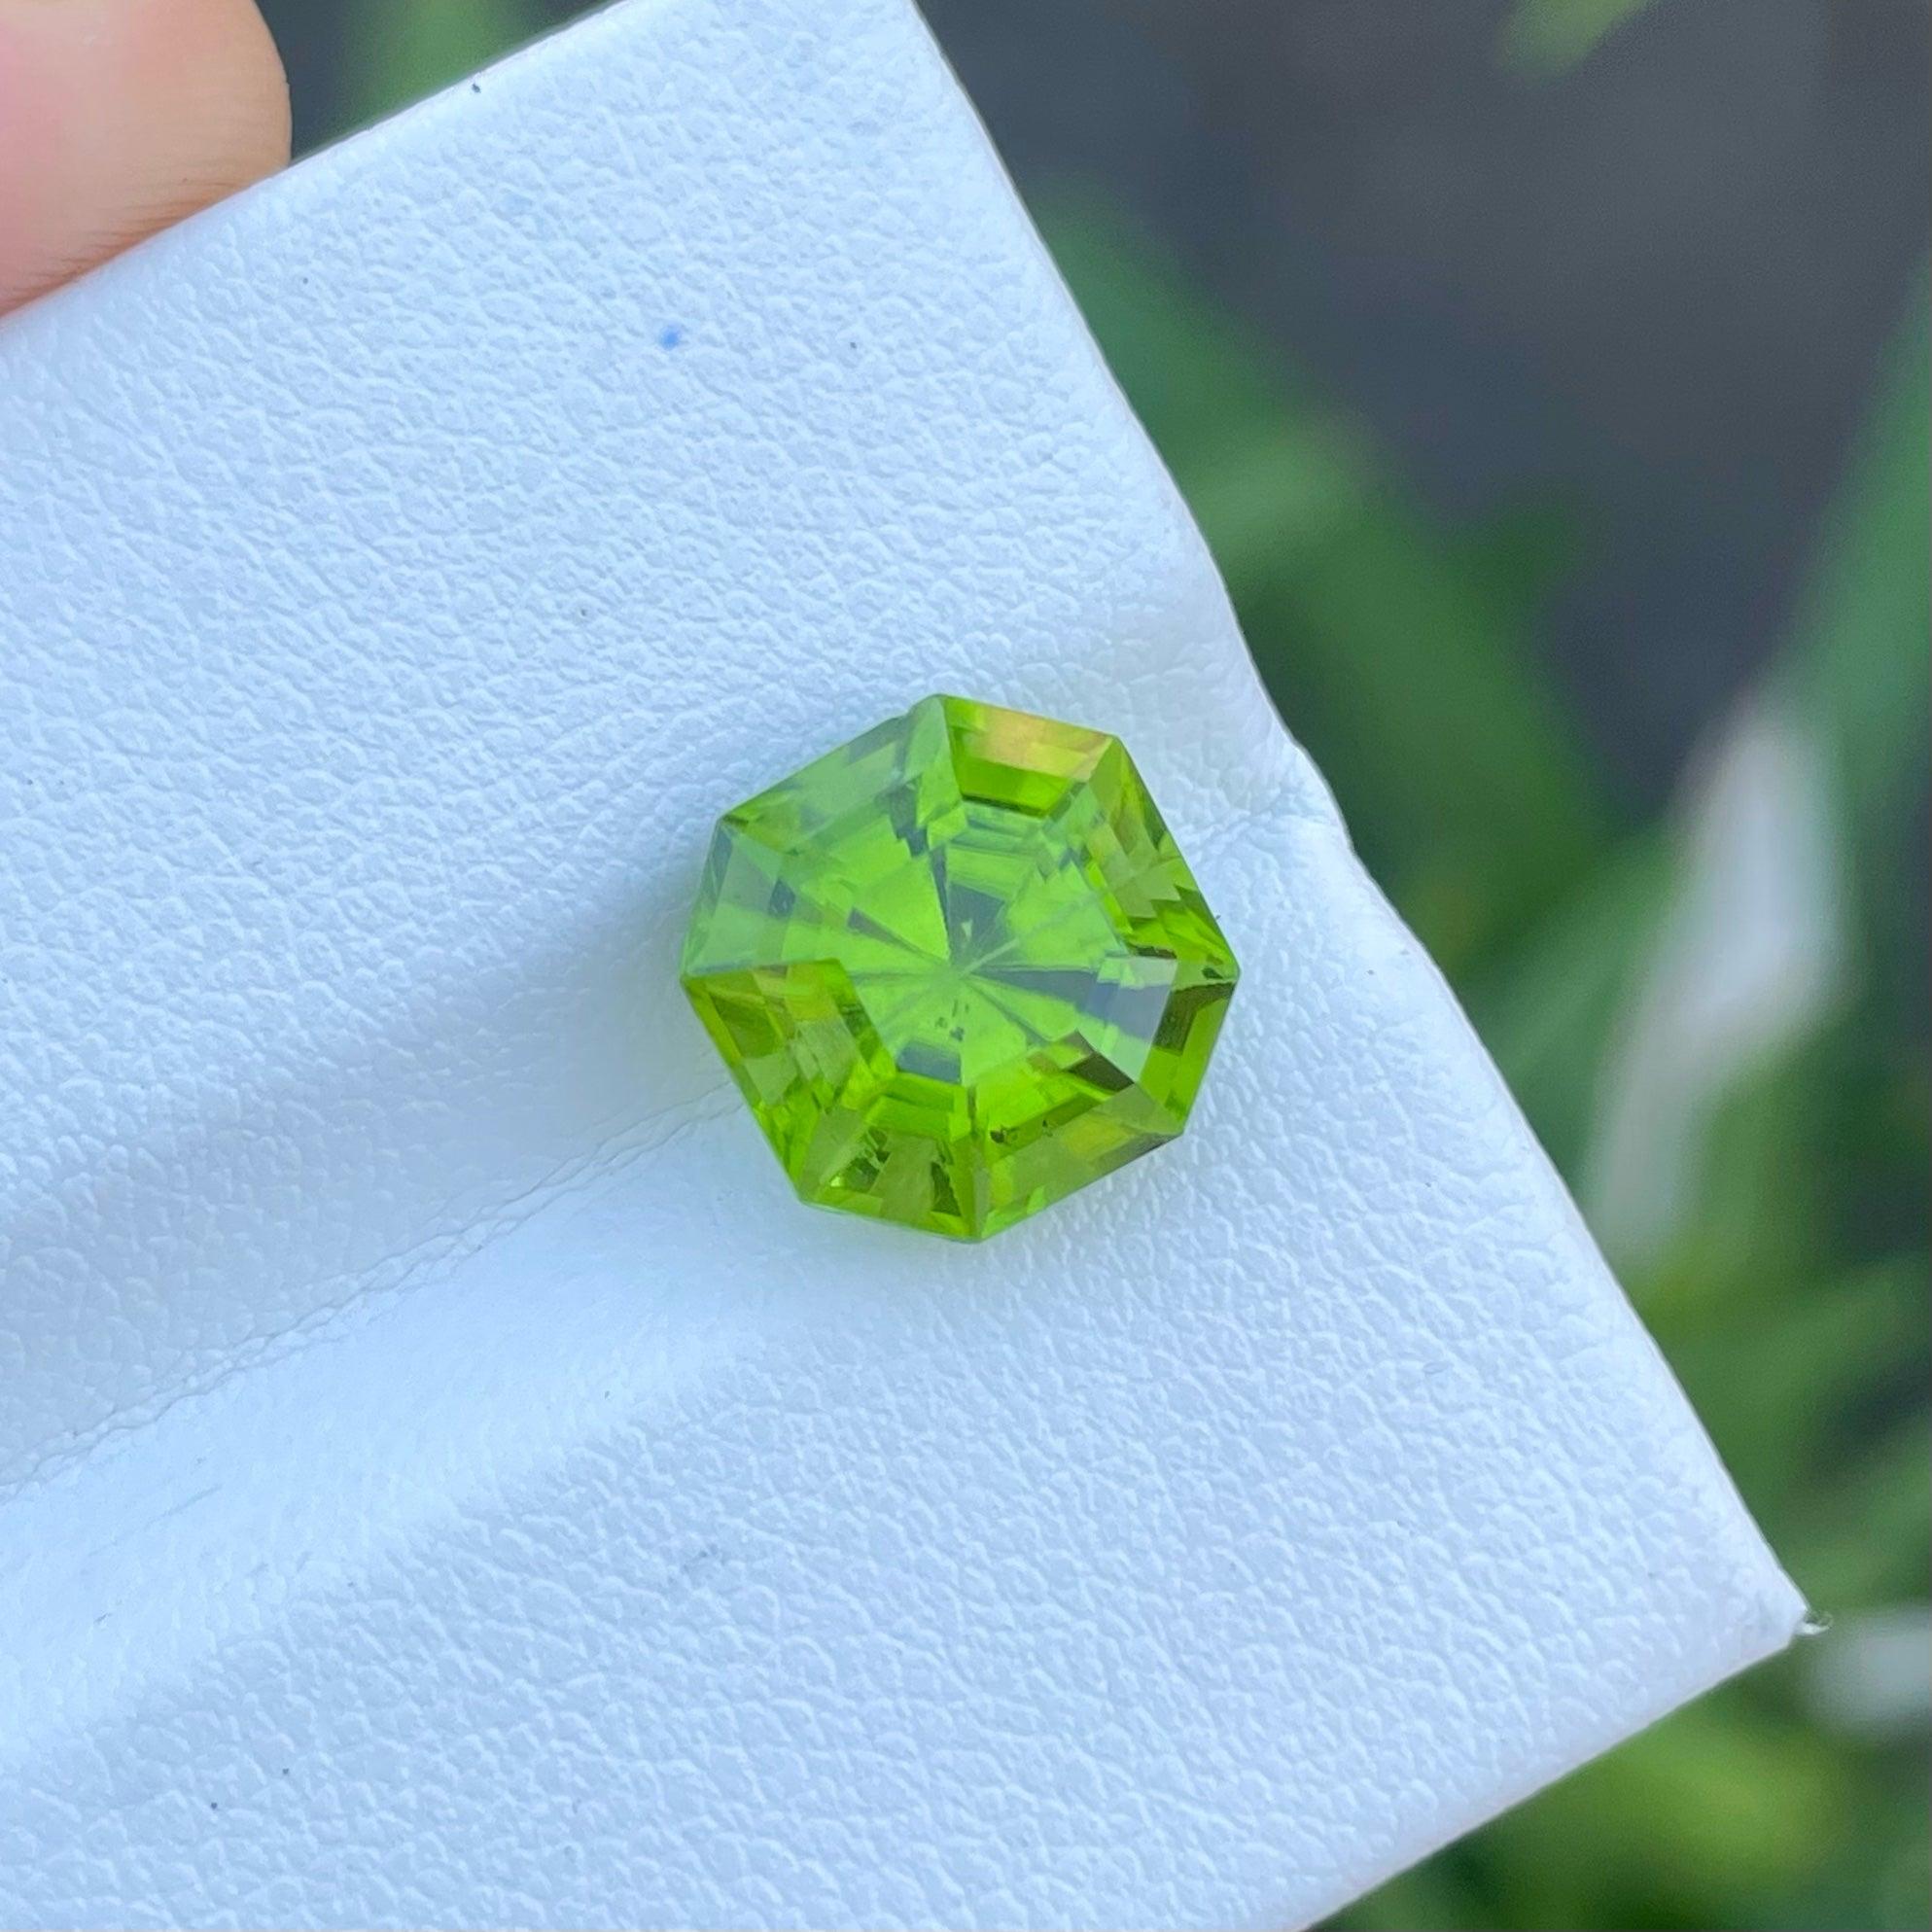 Exquisite Natural Green Peridot Gemstone, Available for Sale at wholesale price natural high quality 5.80 carats SI Clarity loose Peridot from Pakistan.

Product Information:
GEMSTONE TYPE:	Exquisite Natural Green Peridot Gemstone
WEIGHT:	5.80